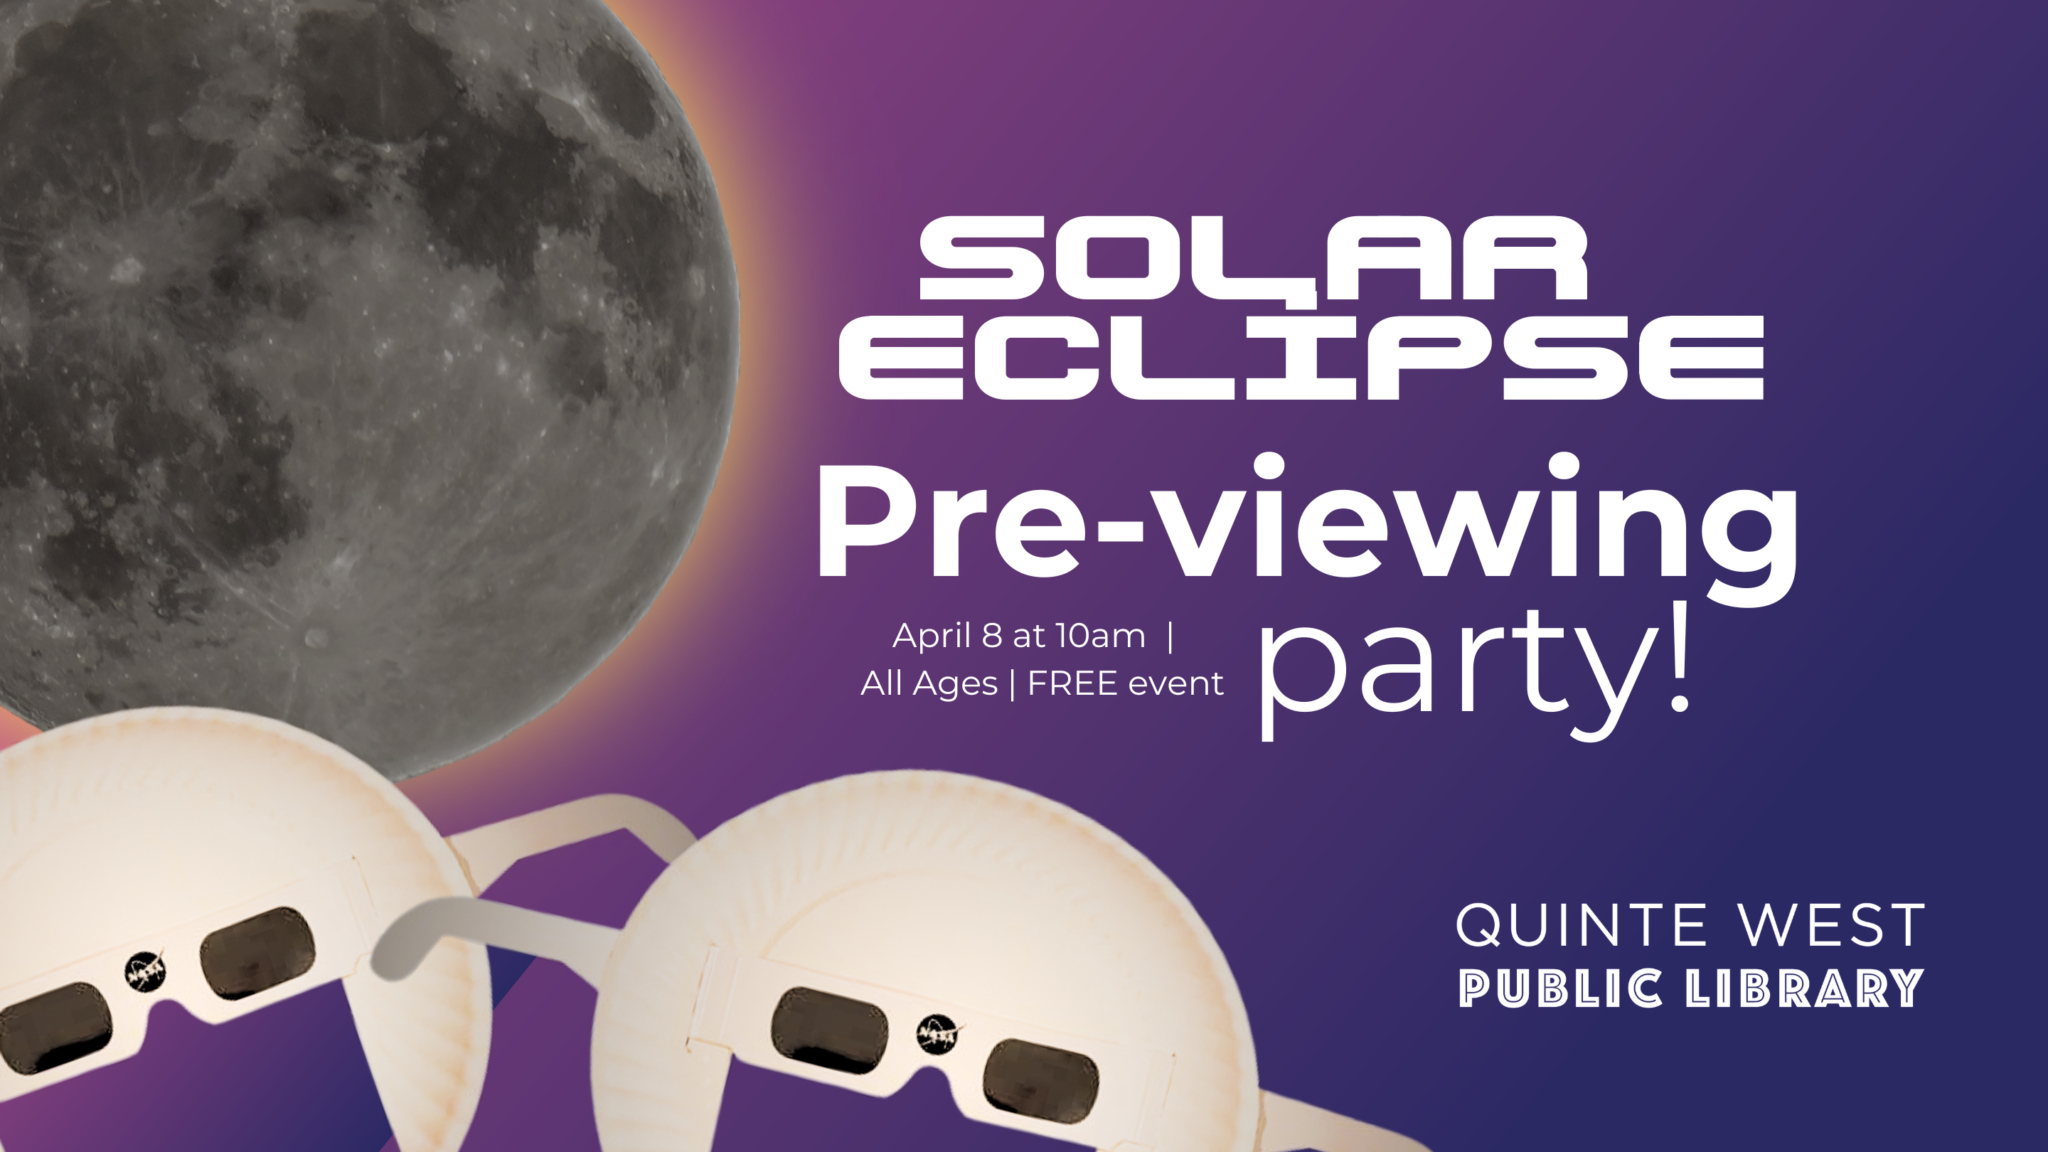 poster showing an eclipse, eclipse classes and a purple background. Titled "Solar Eclipse Pre-viewing party".